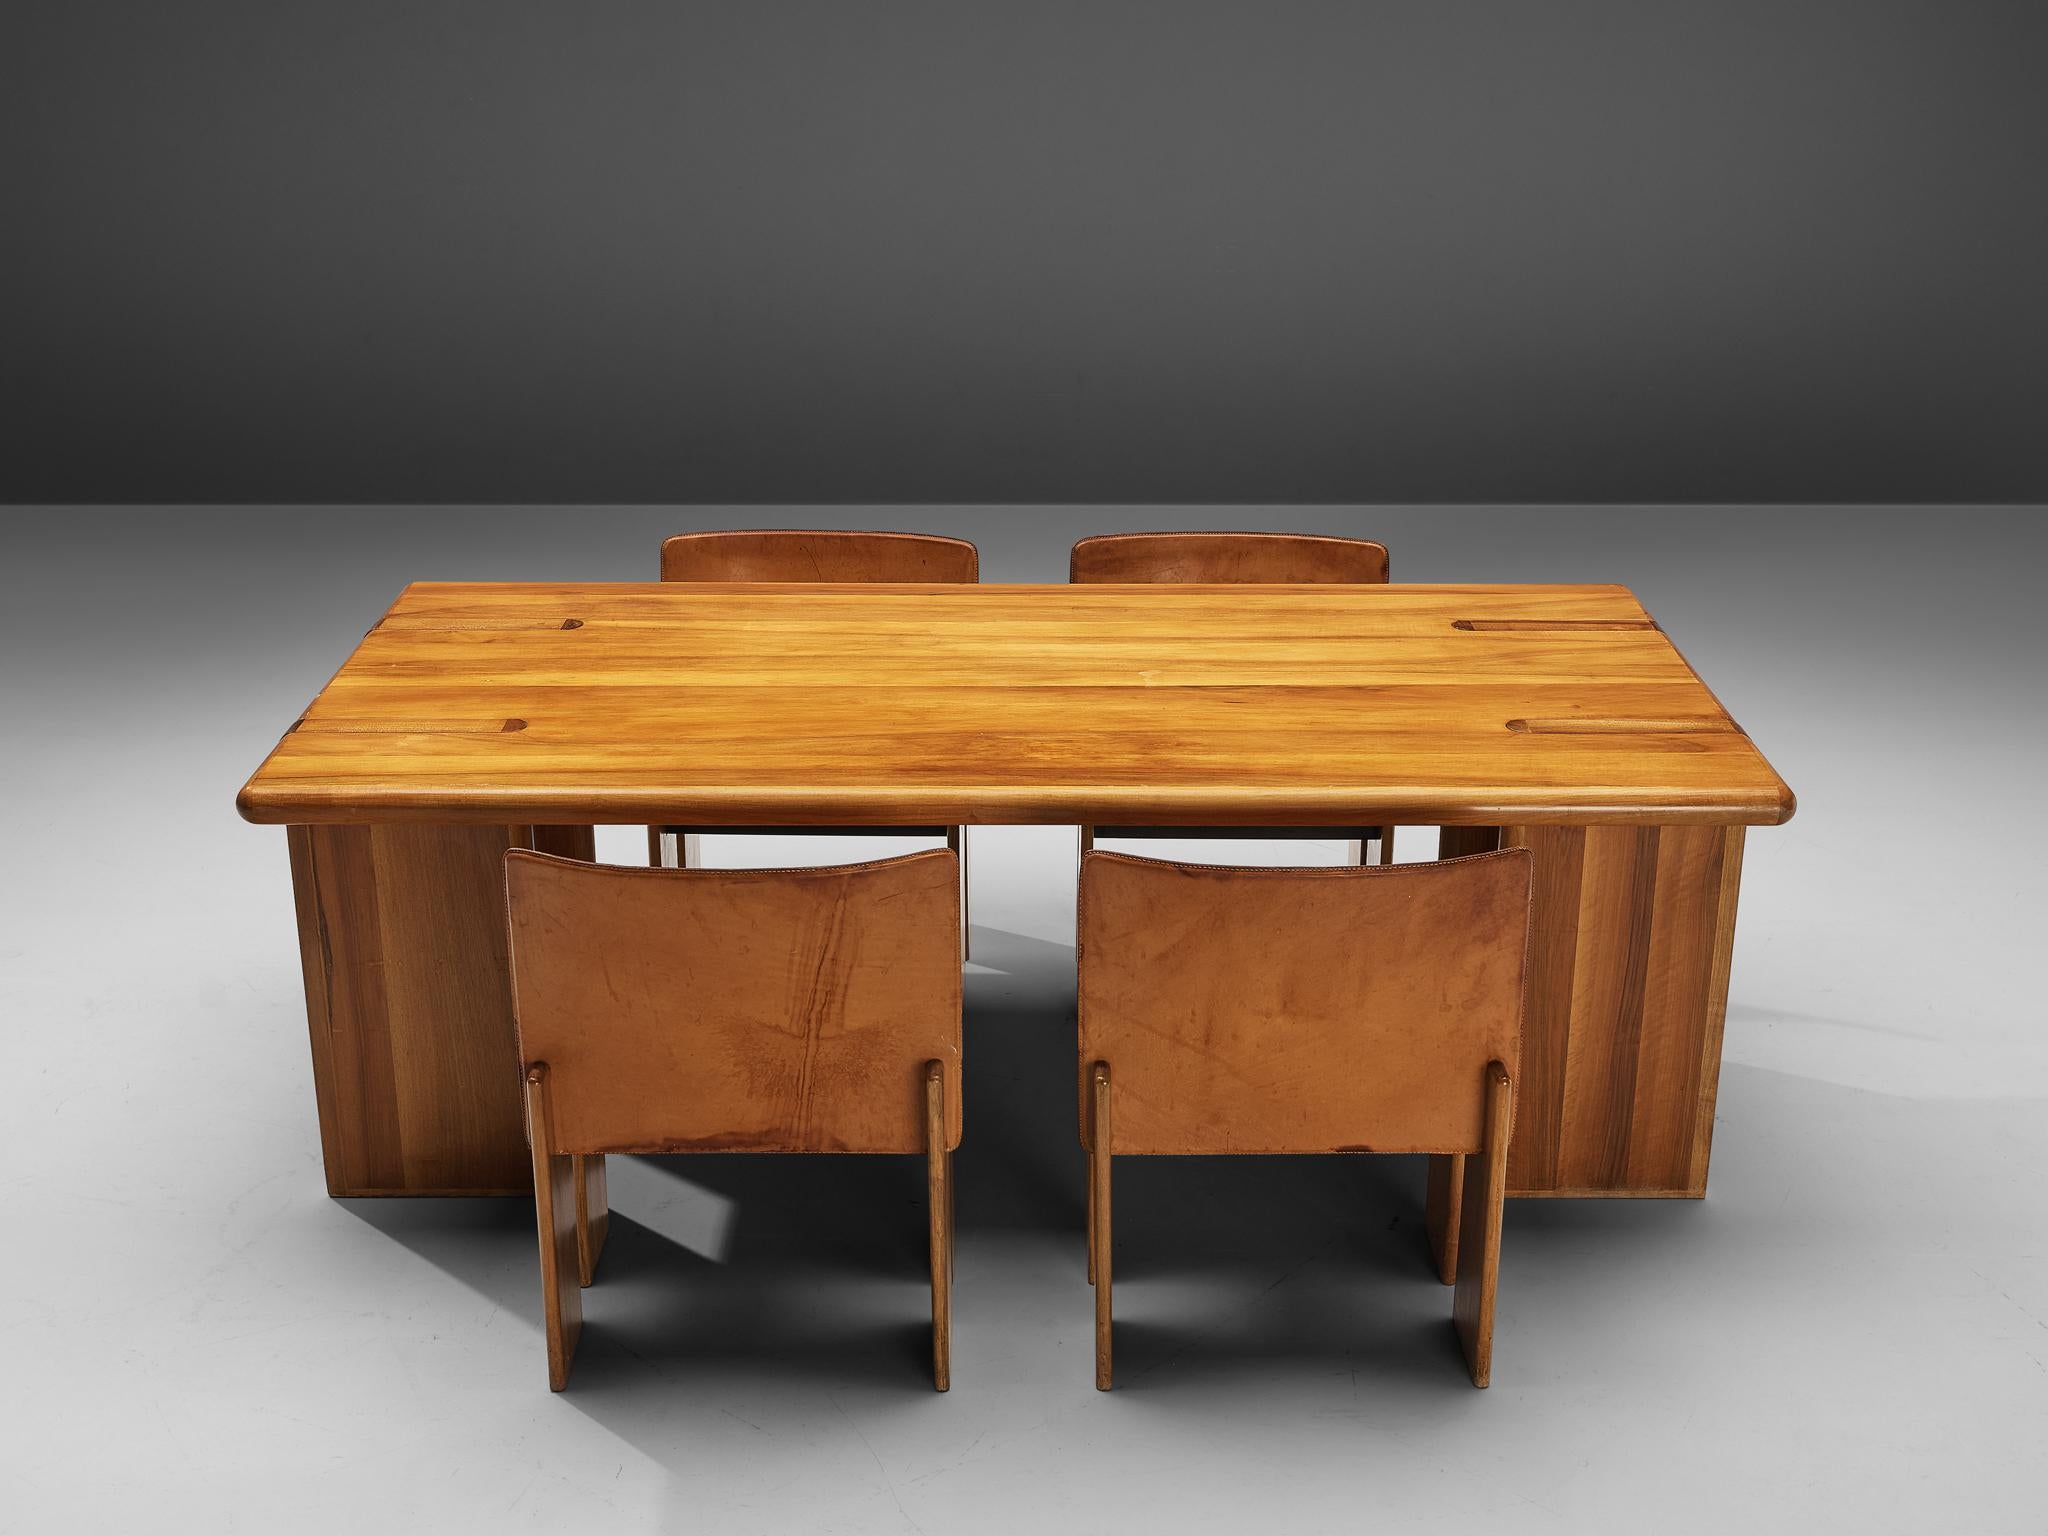 Barsacchi & Vegni Dining Table in Walnut with Dining Chairs in Cognac Leather 2